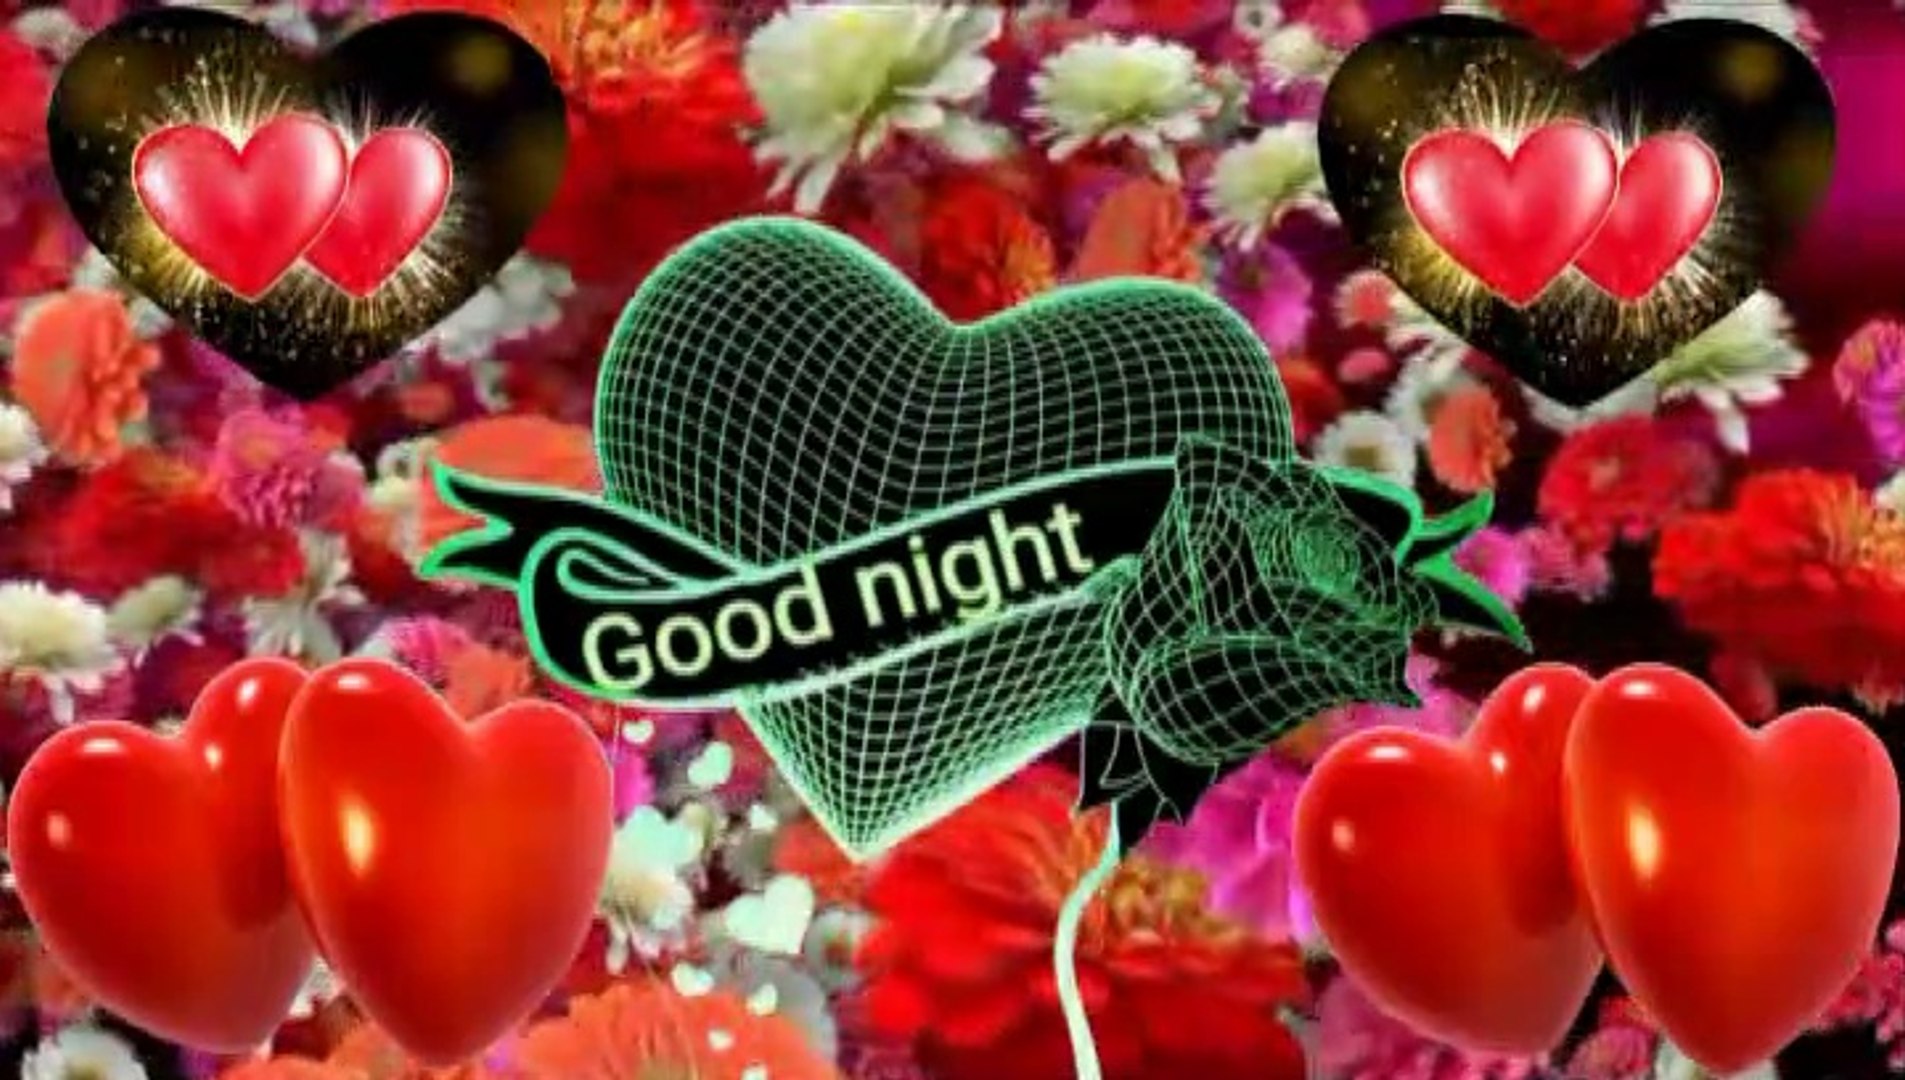 Good Night Status Song Wishes For You Good Night Video Good Night Photo Images Good Night Love Video Good Night Love Song Good Night Love Sayari Video Dailymotion